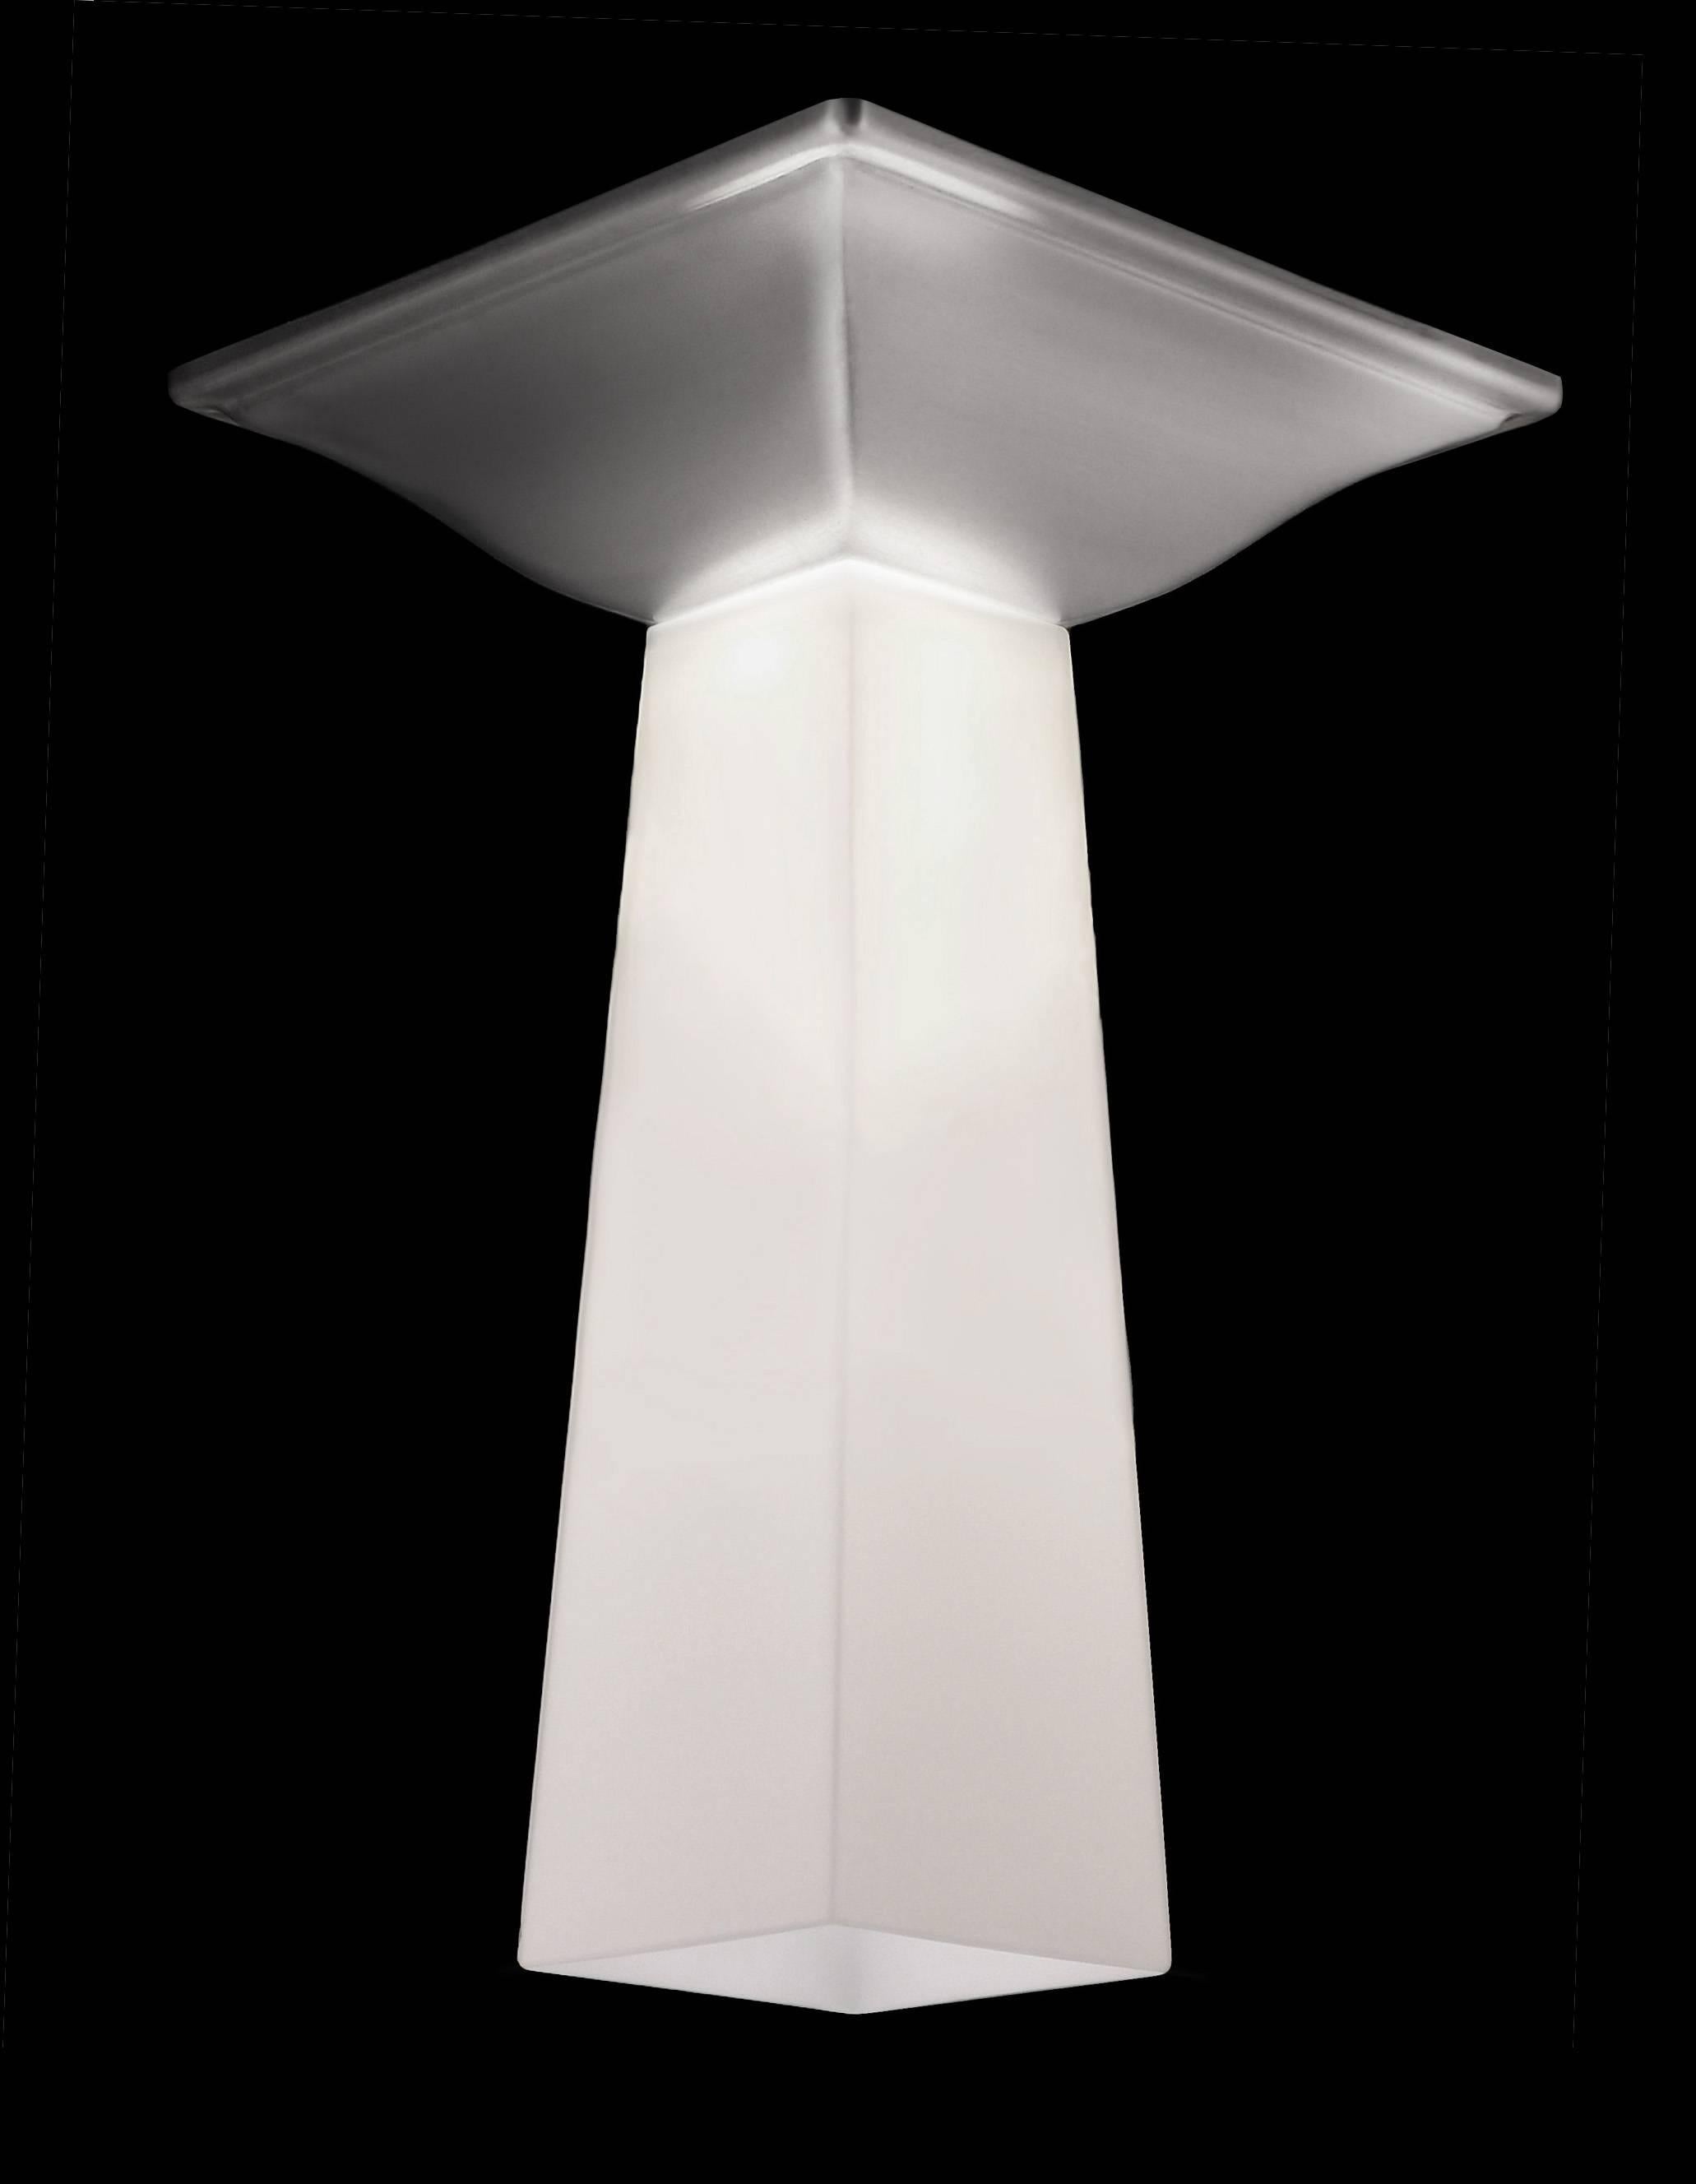 Flush mounted lighting fixture in the manner of Streamline Moderne. Matte nickel ceiling canopy with white tapered glass diffuser. LED illuminated 2700K standard color temperature. LED has lens to focus light downward washing the interior of shade